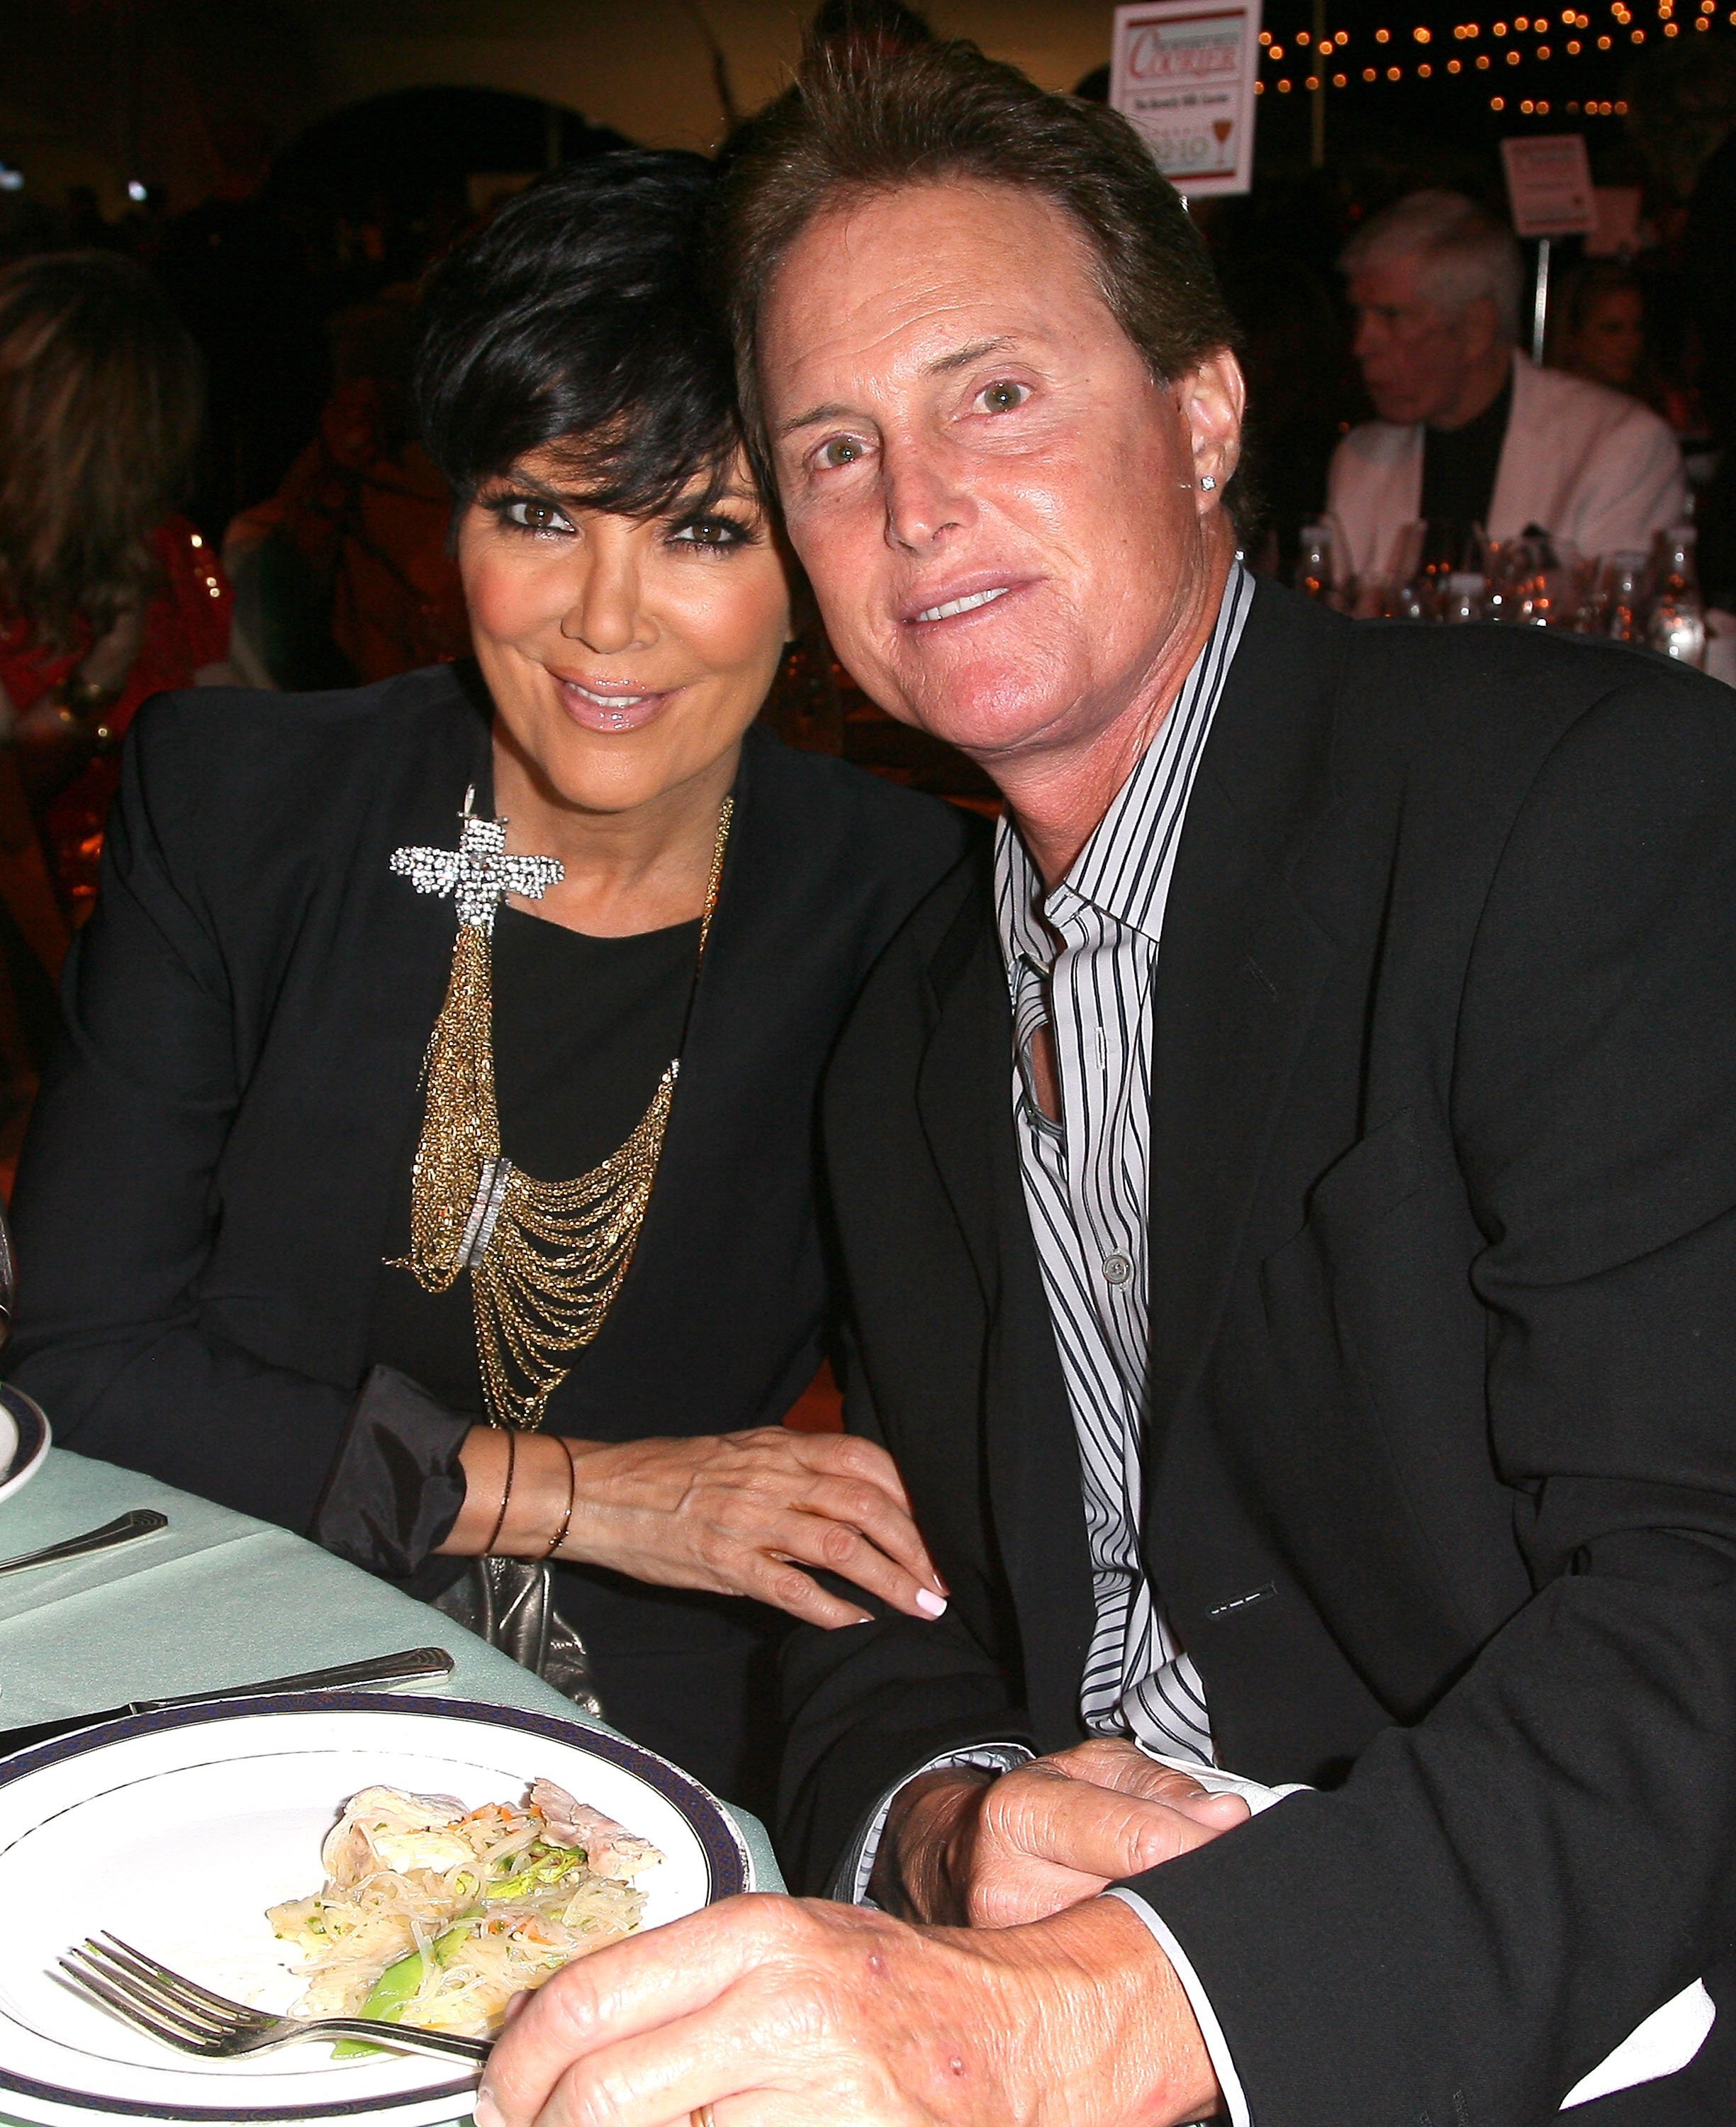 Kris Jenner and Caitlyn, formerly Bruce Jenner attending a wine and food festival in September 2010. | Photo: Getty Images